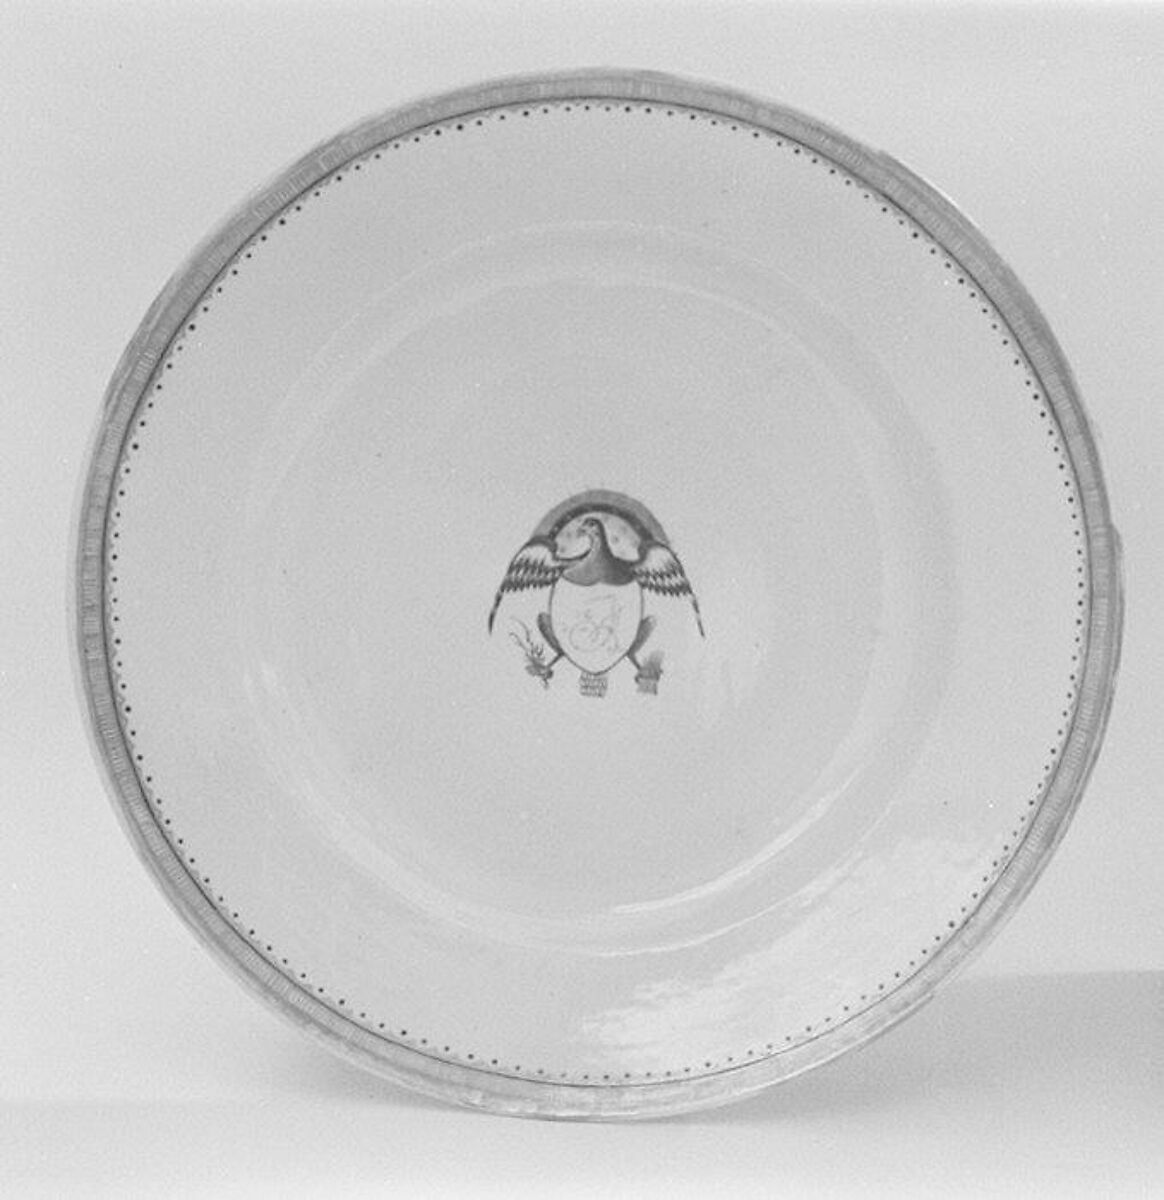 Plate (part of a service), Hard-paste porcelain, Chinese, for American market 